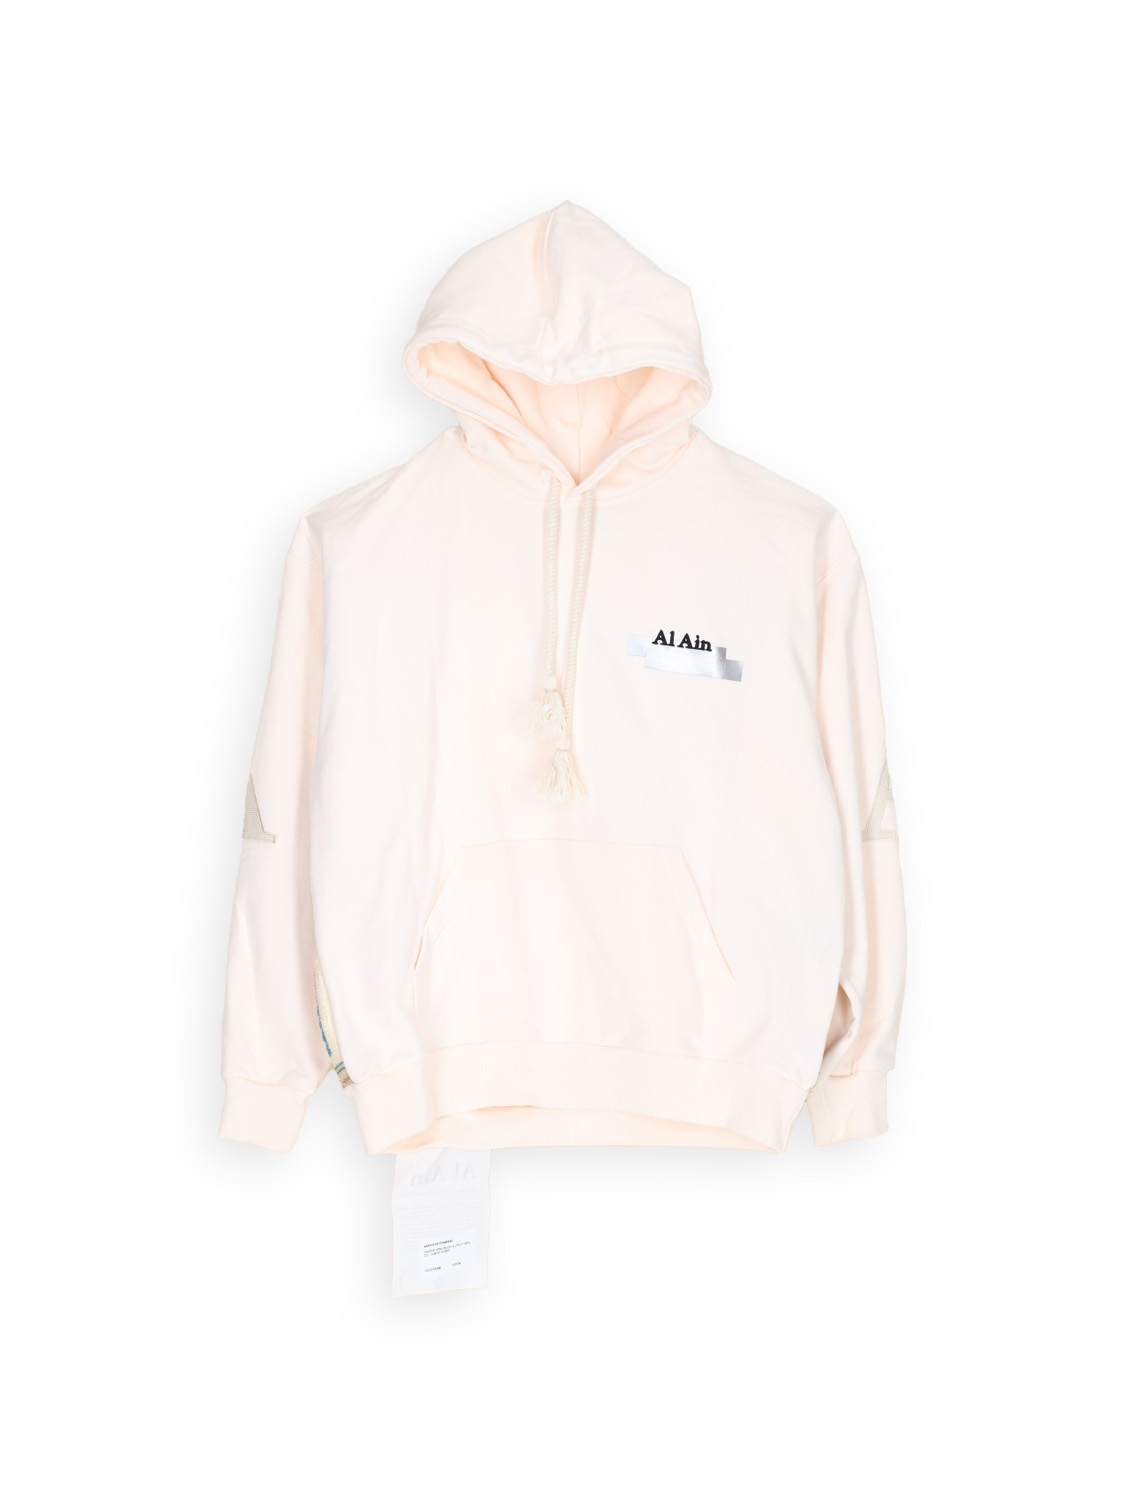 Ahox – Oversized Hoodie with pattern 